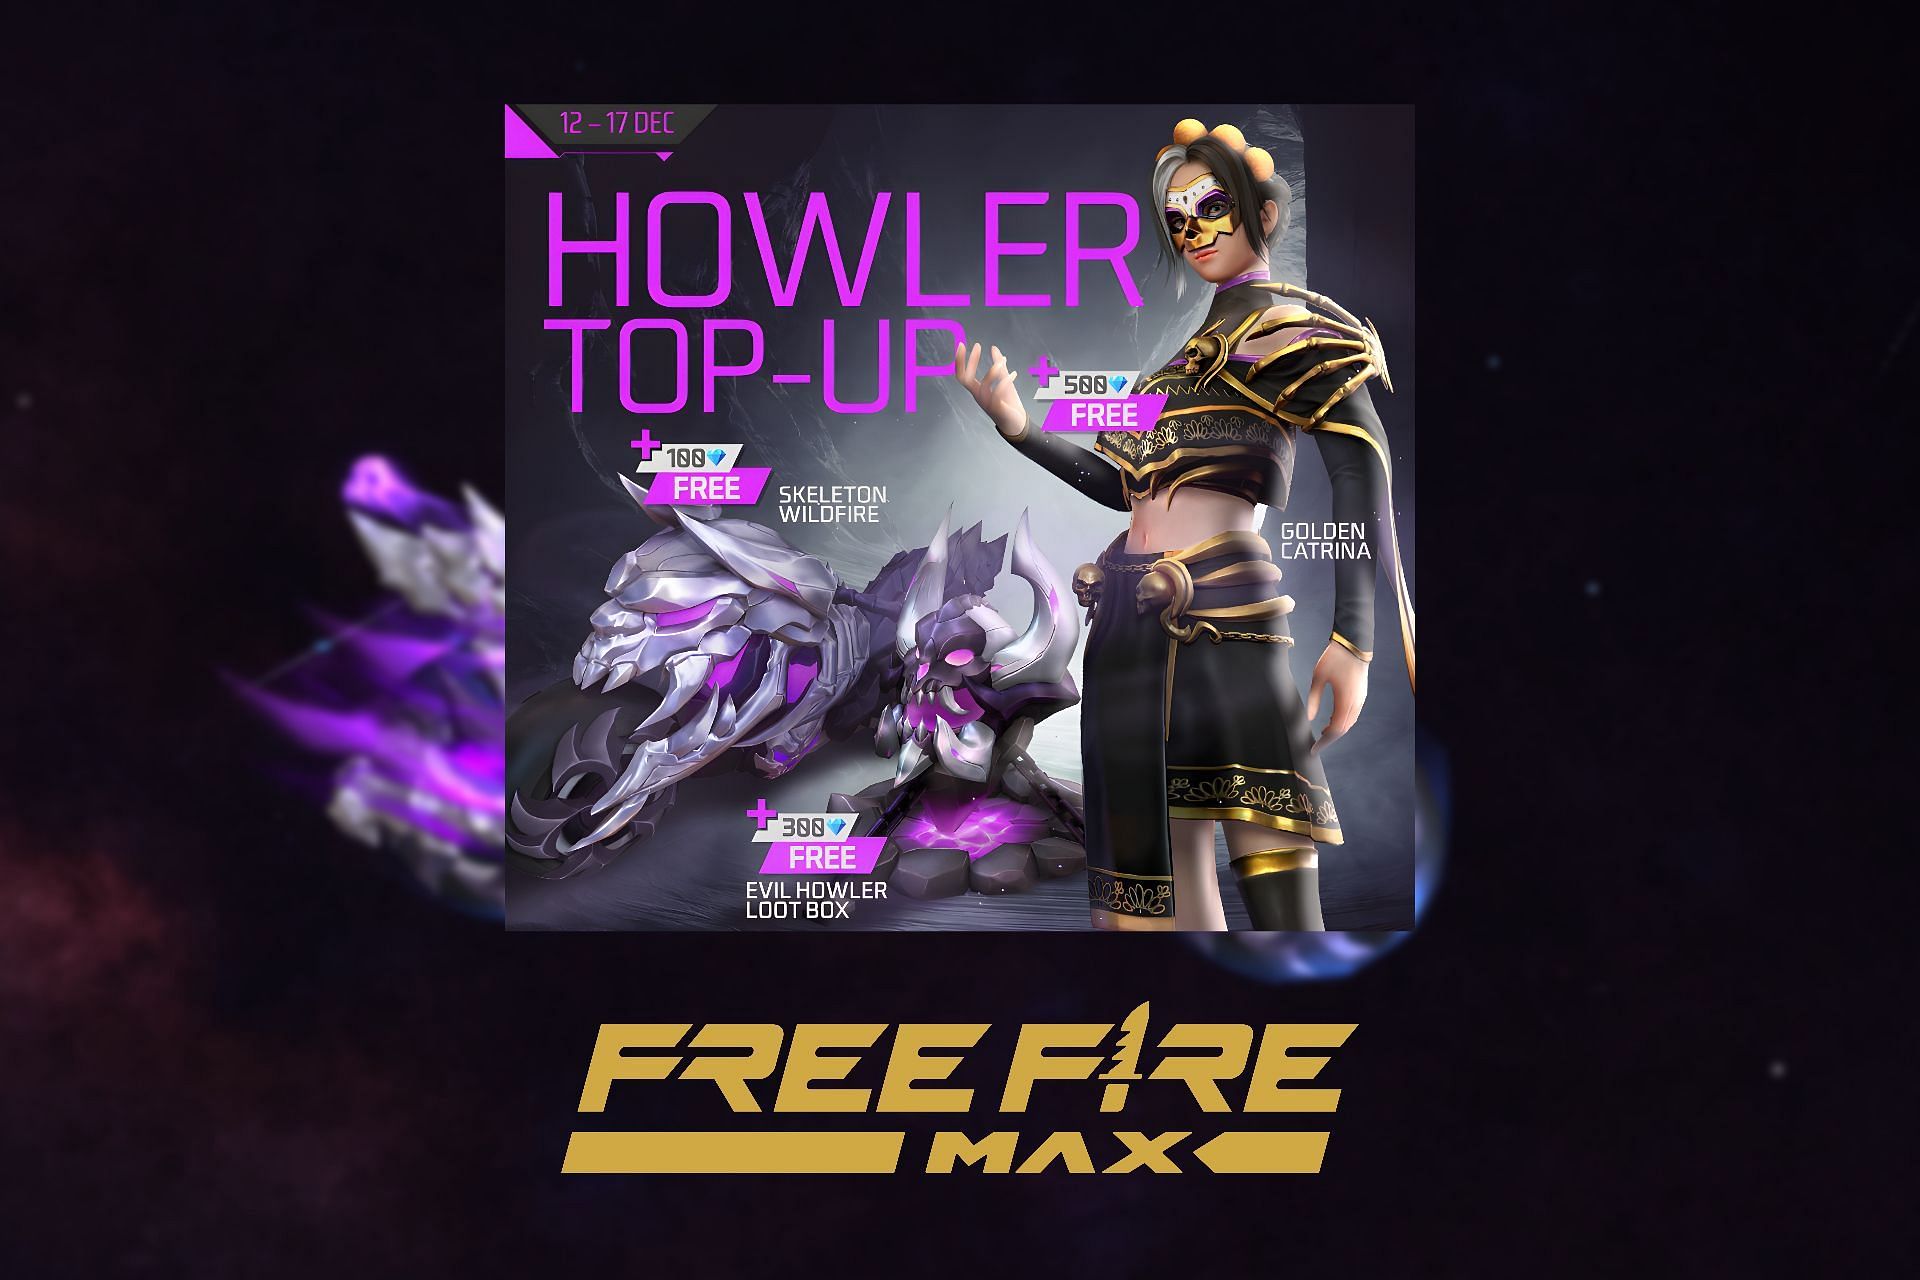 An event guide for Free Fire MAX